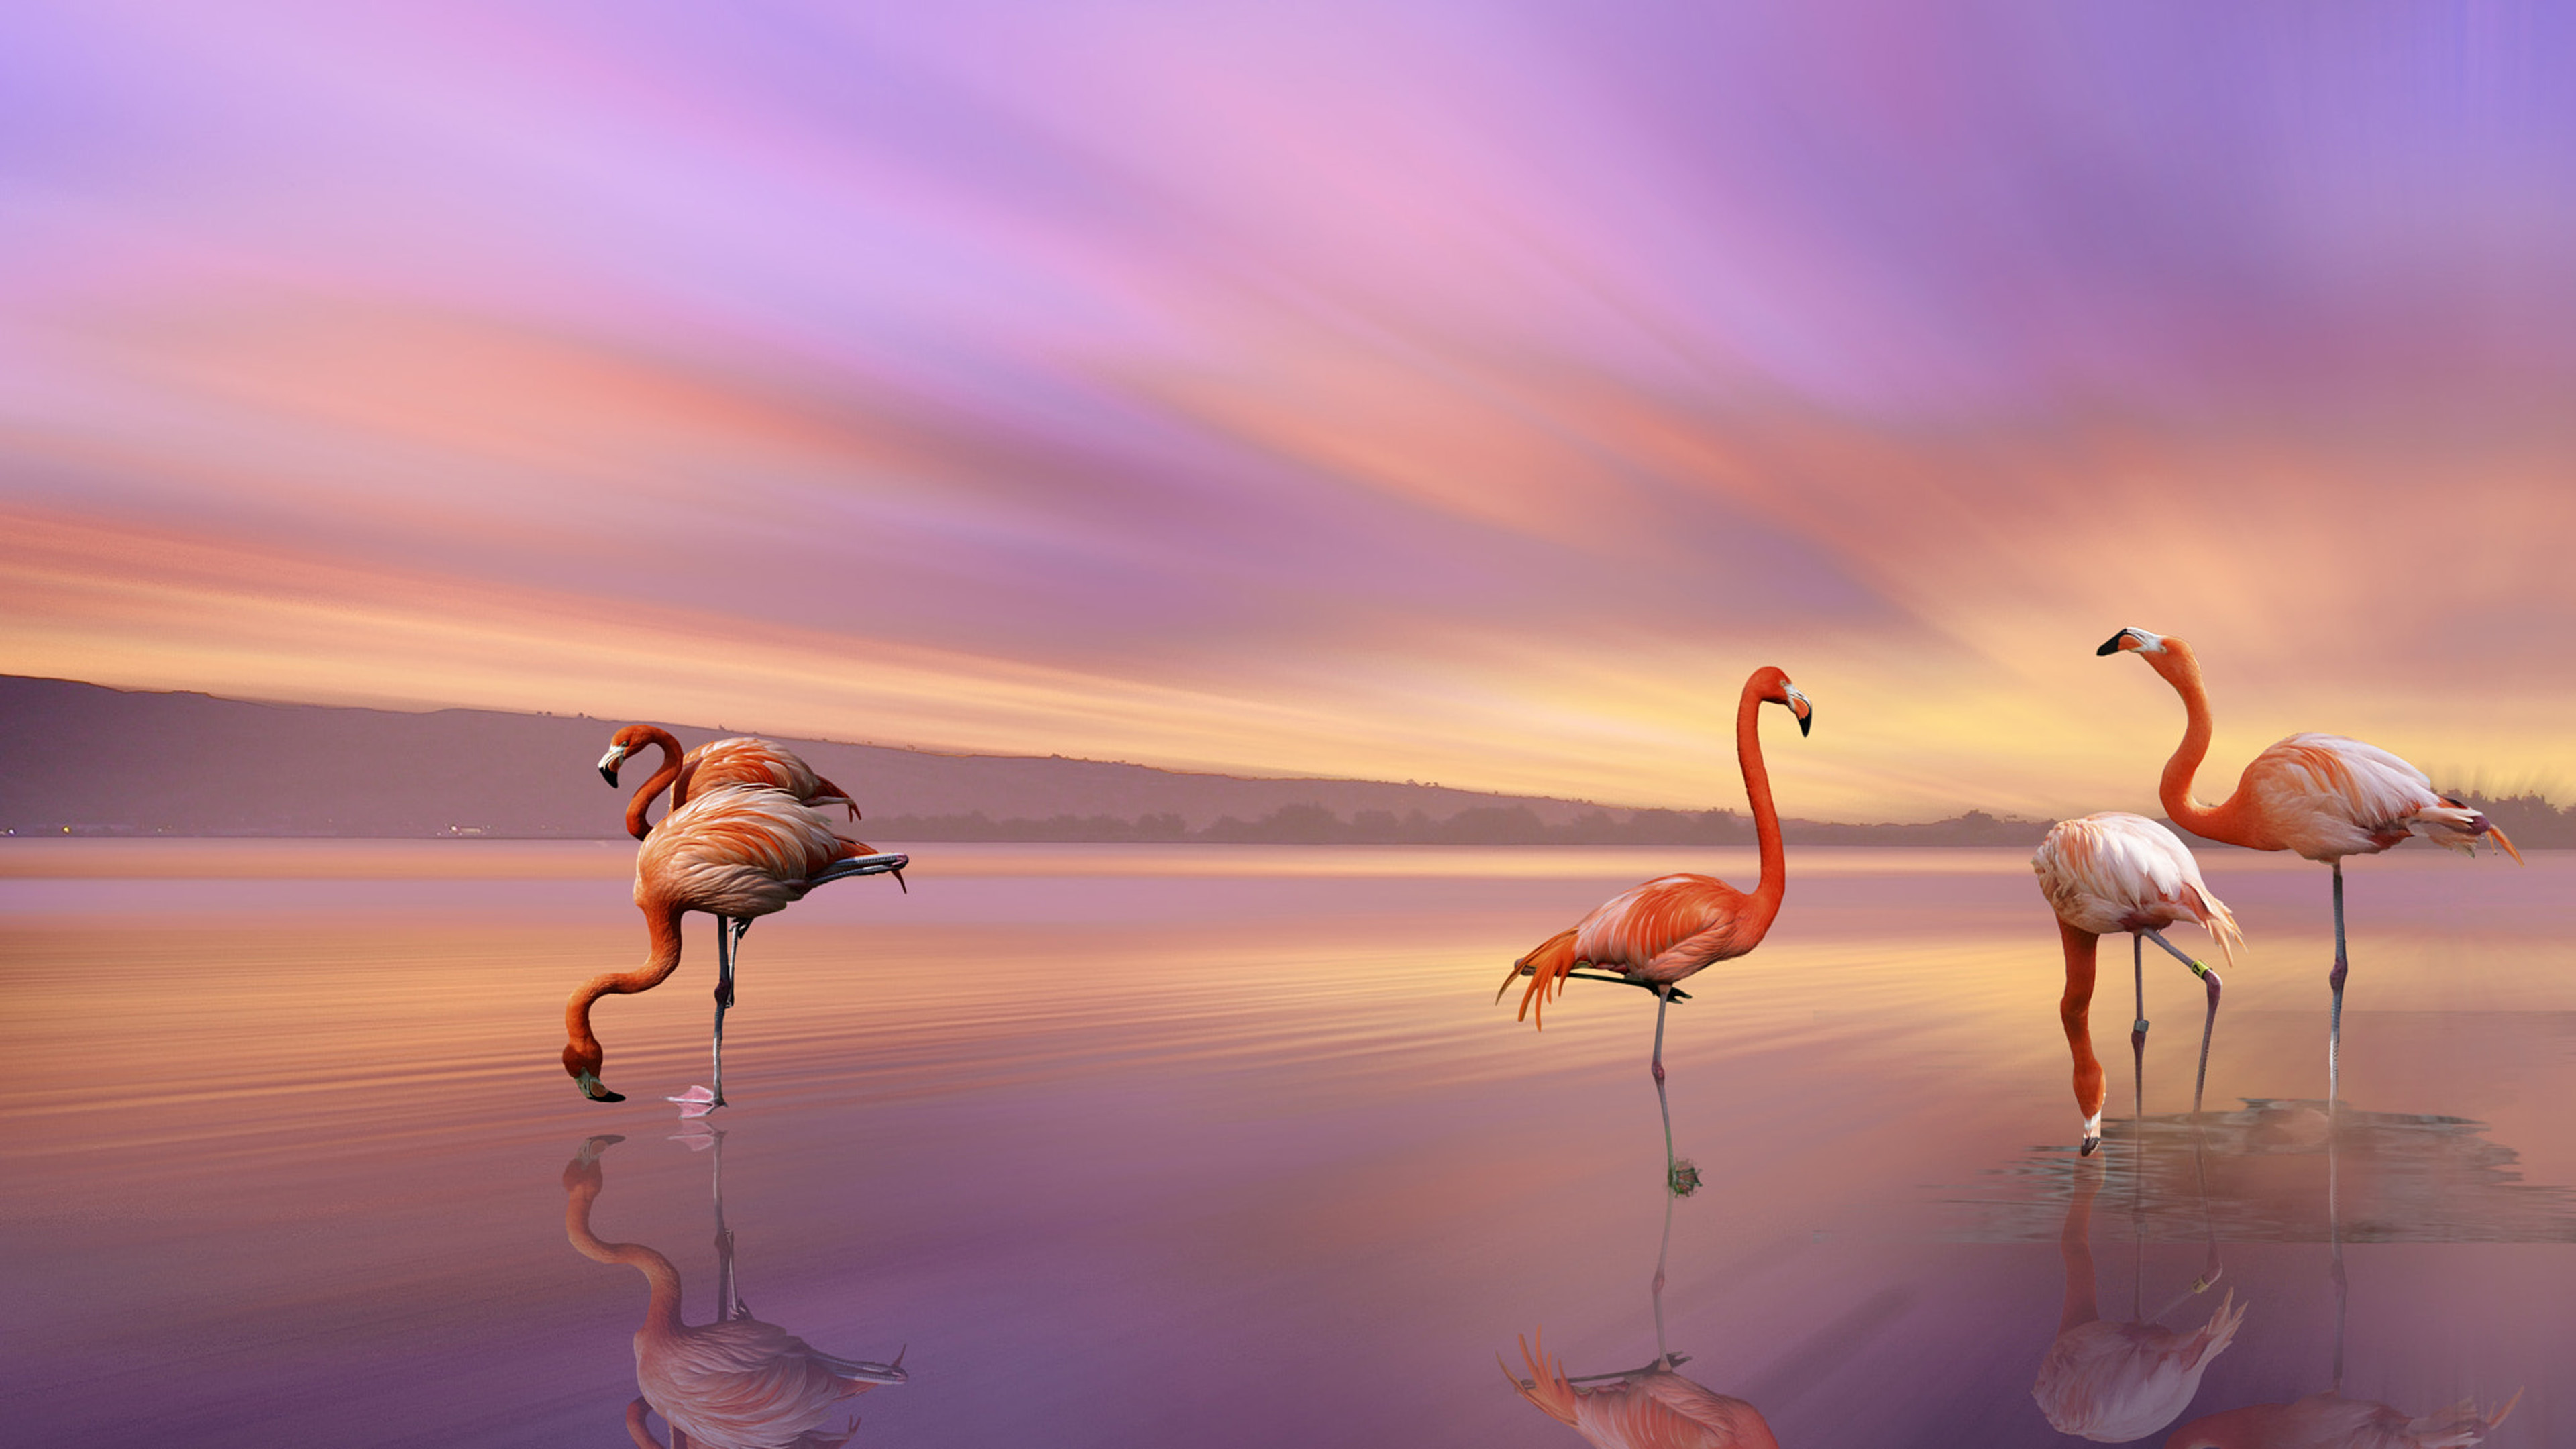 Flamingo Couples Cellphone Wallpaper Images Free Download on Lovepik   400230553